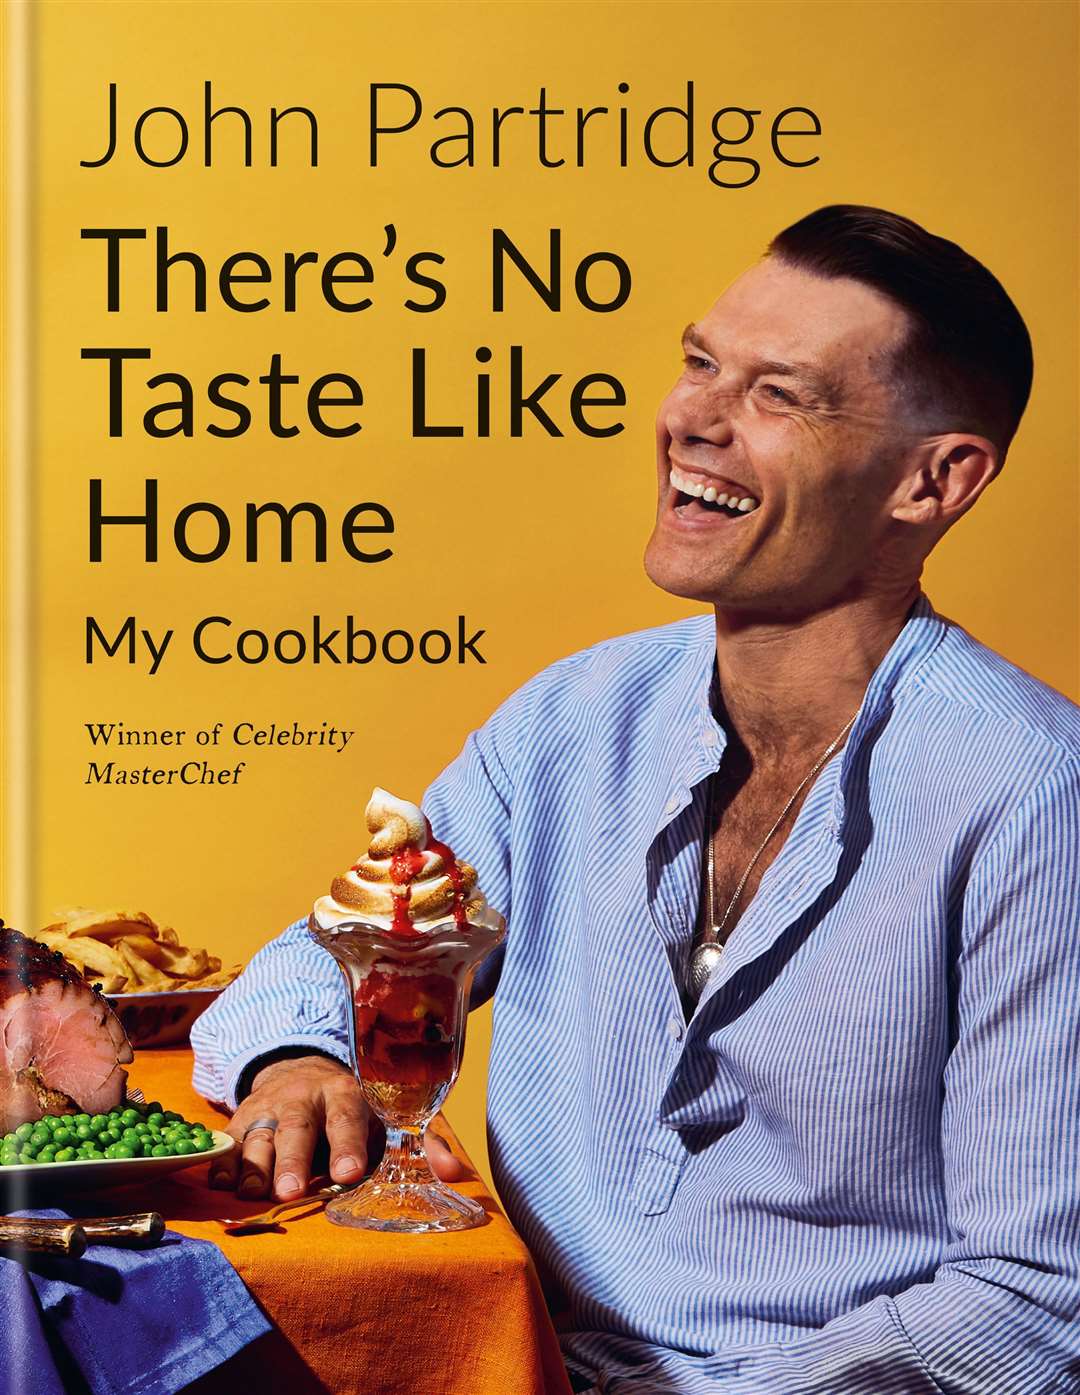 There's No Taste Like Home by John Partridge.